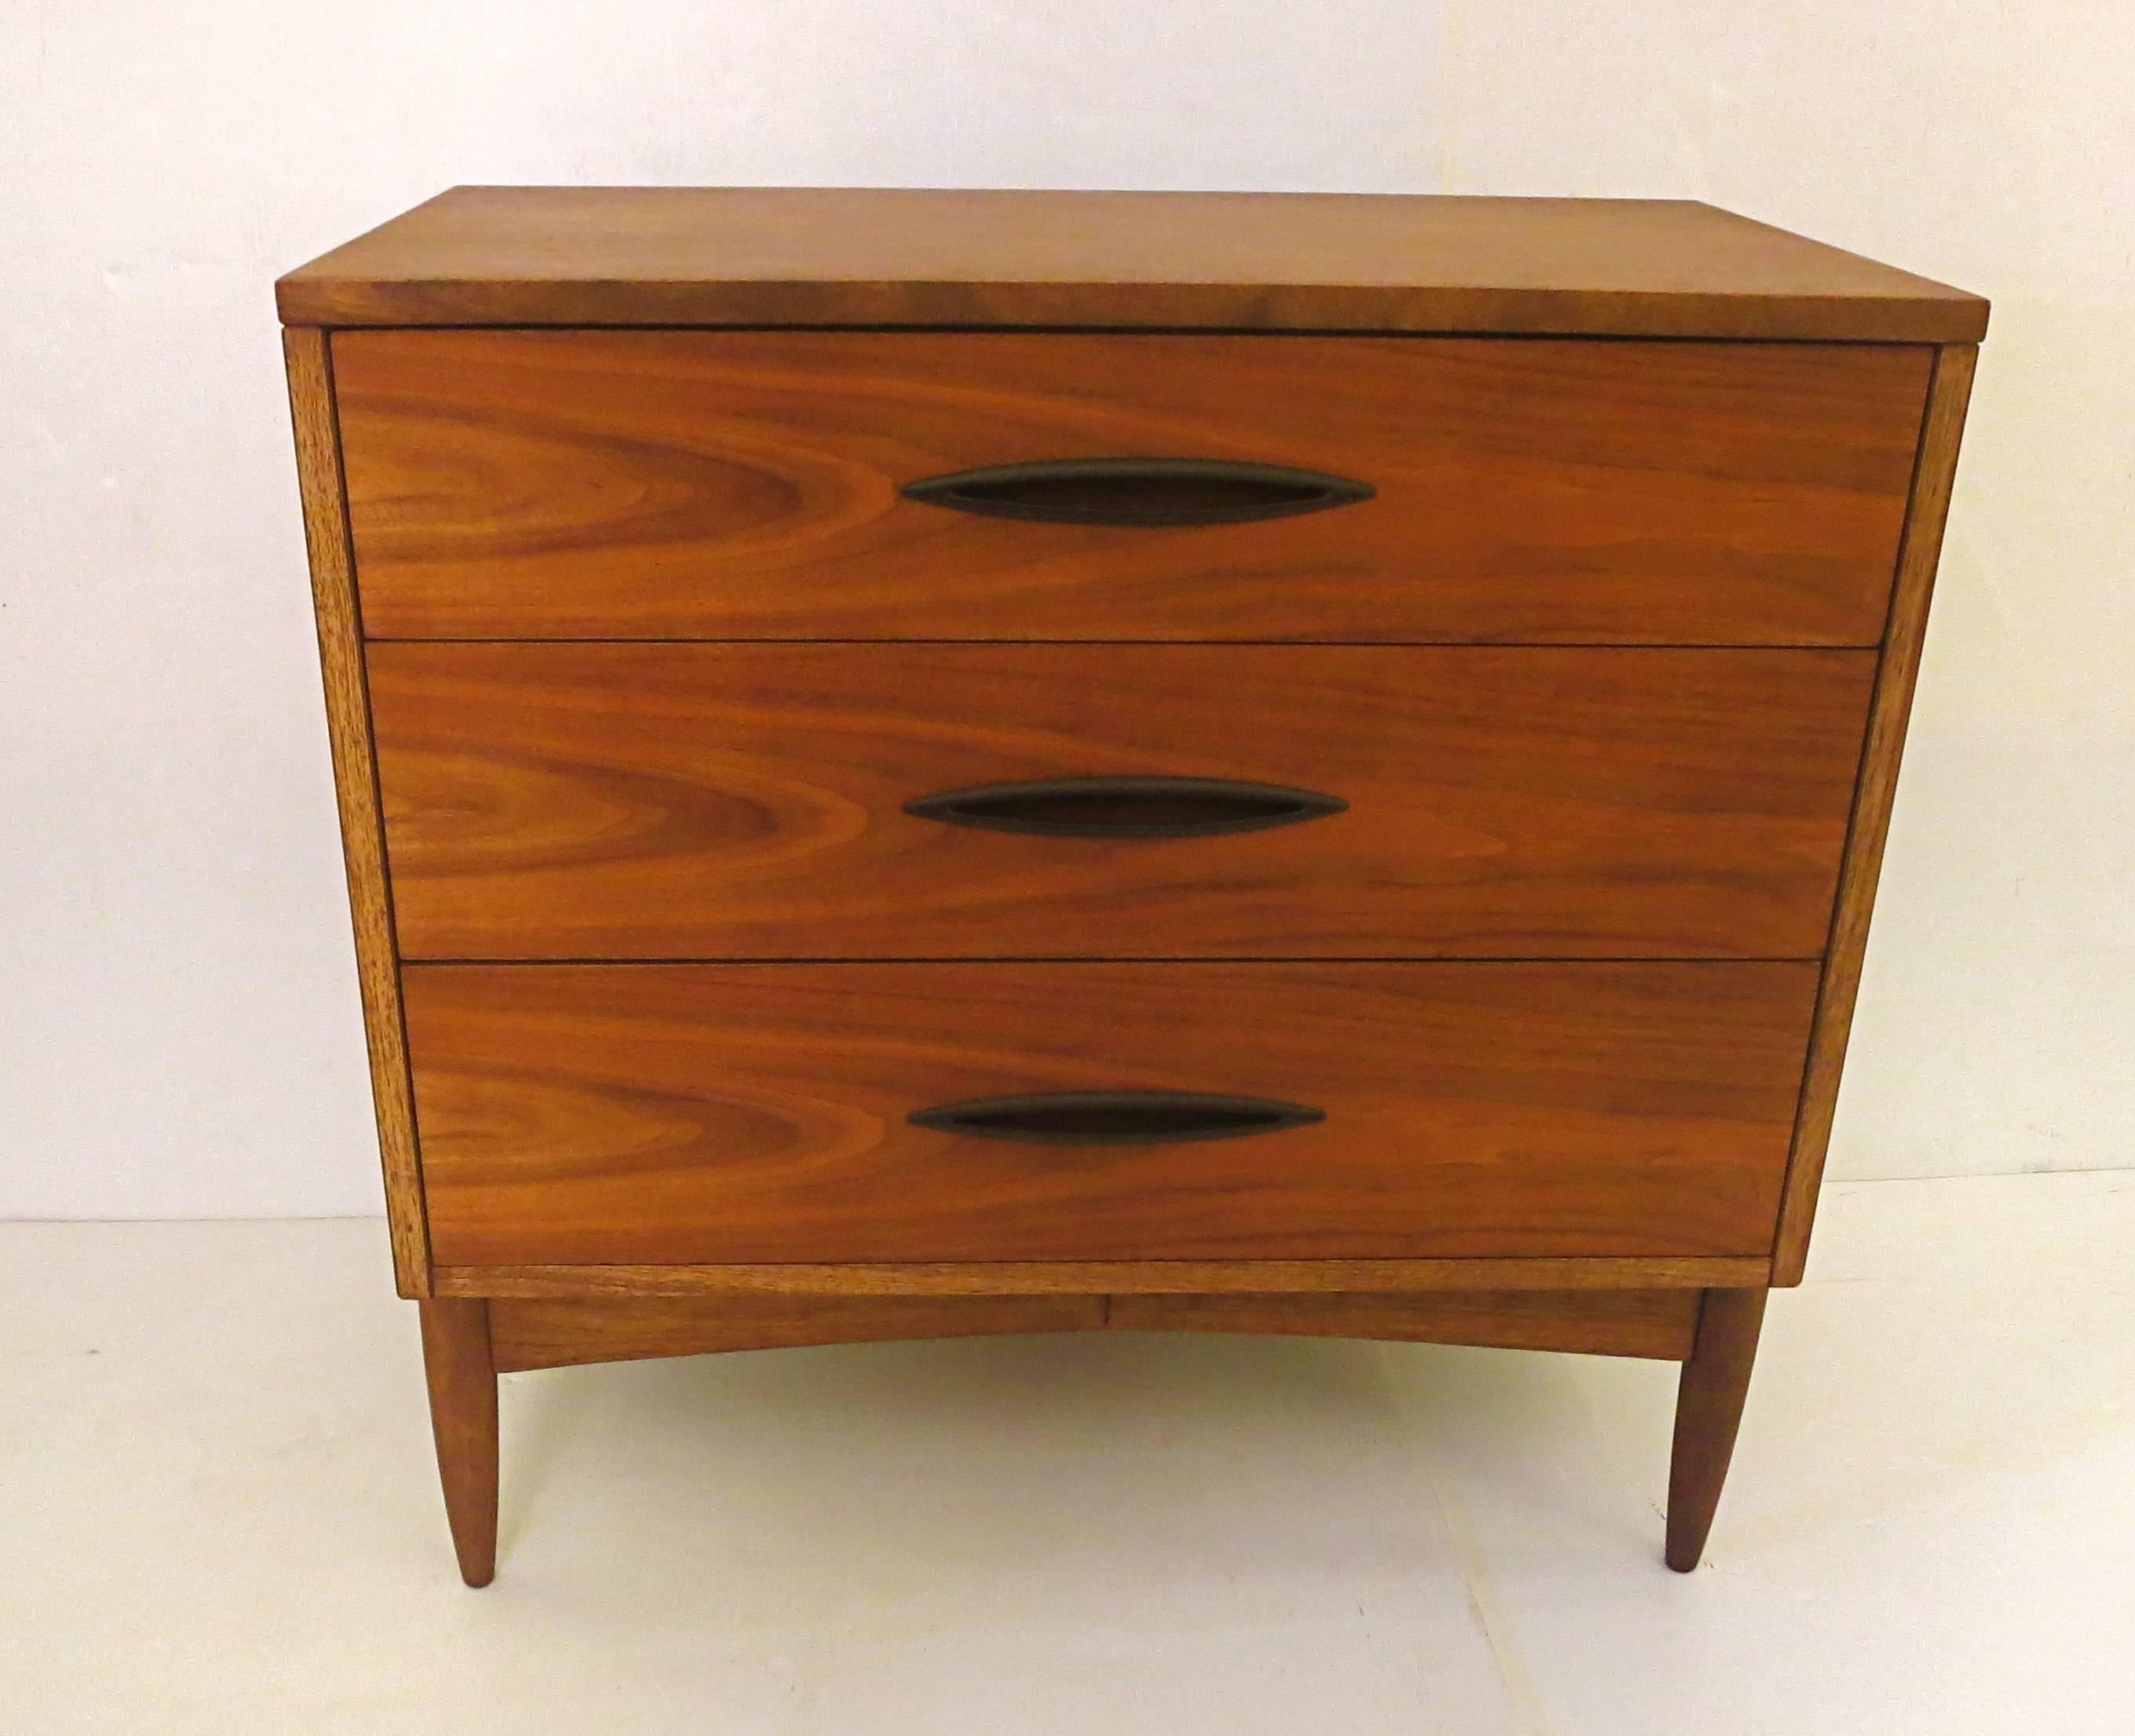 Beautiful triple dresser walnut American modern dresser chest, simple lines elegant totally refinished, with black enameled metal handles and metal railing, the drawers slide nice and soft, good quality piece.